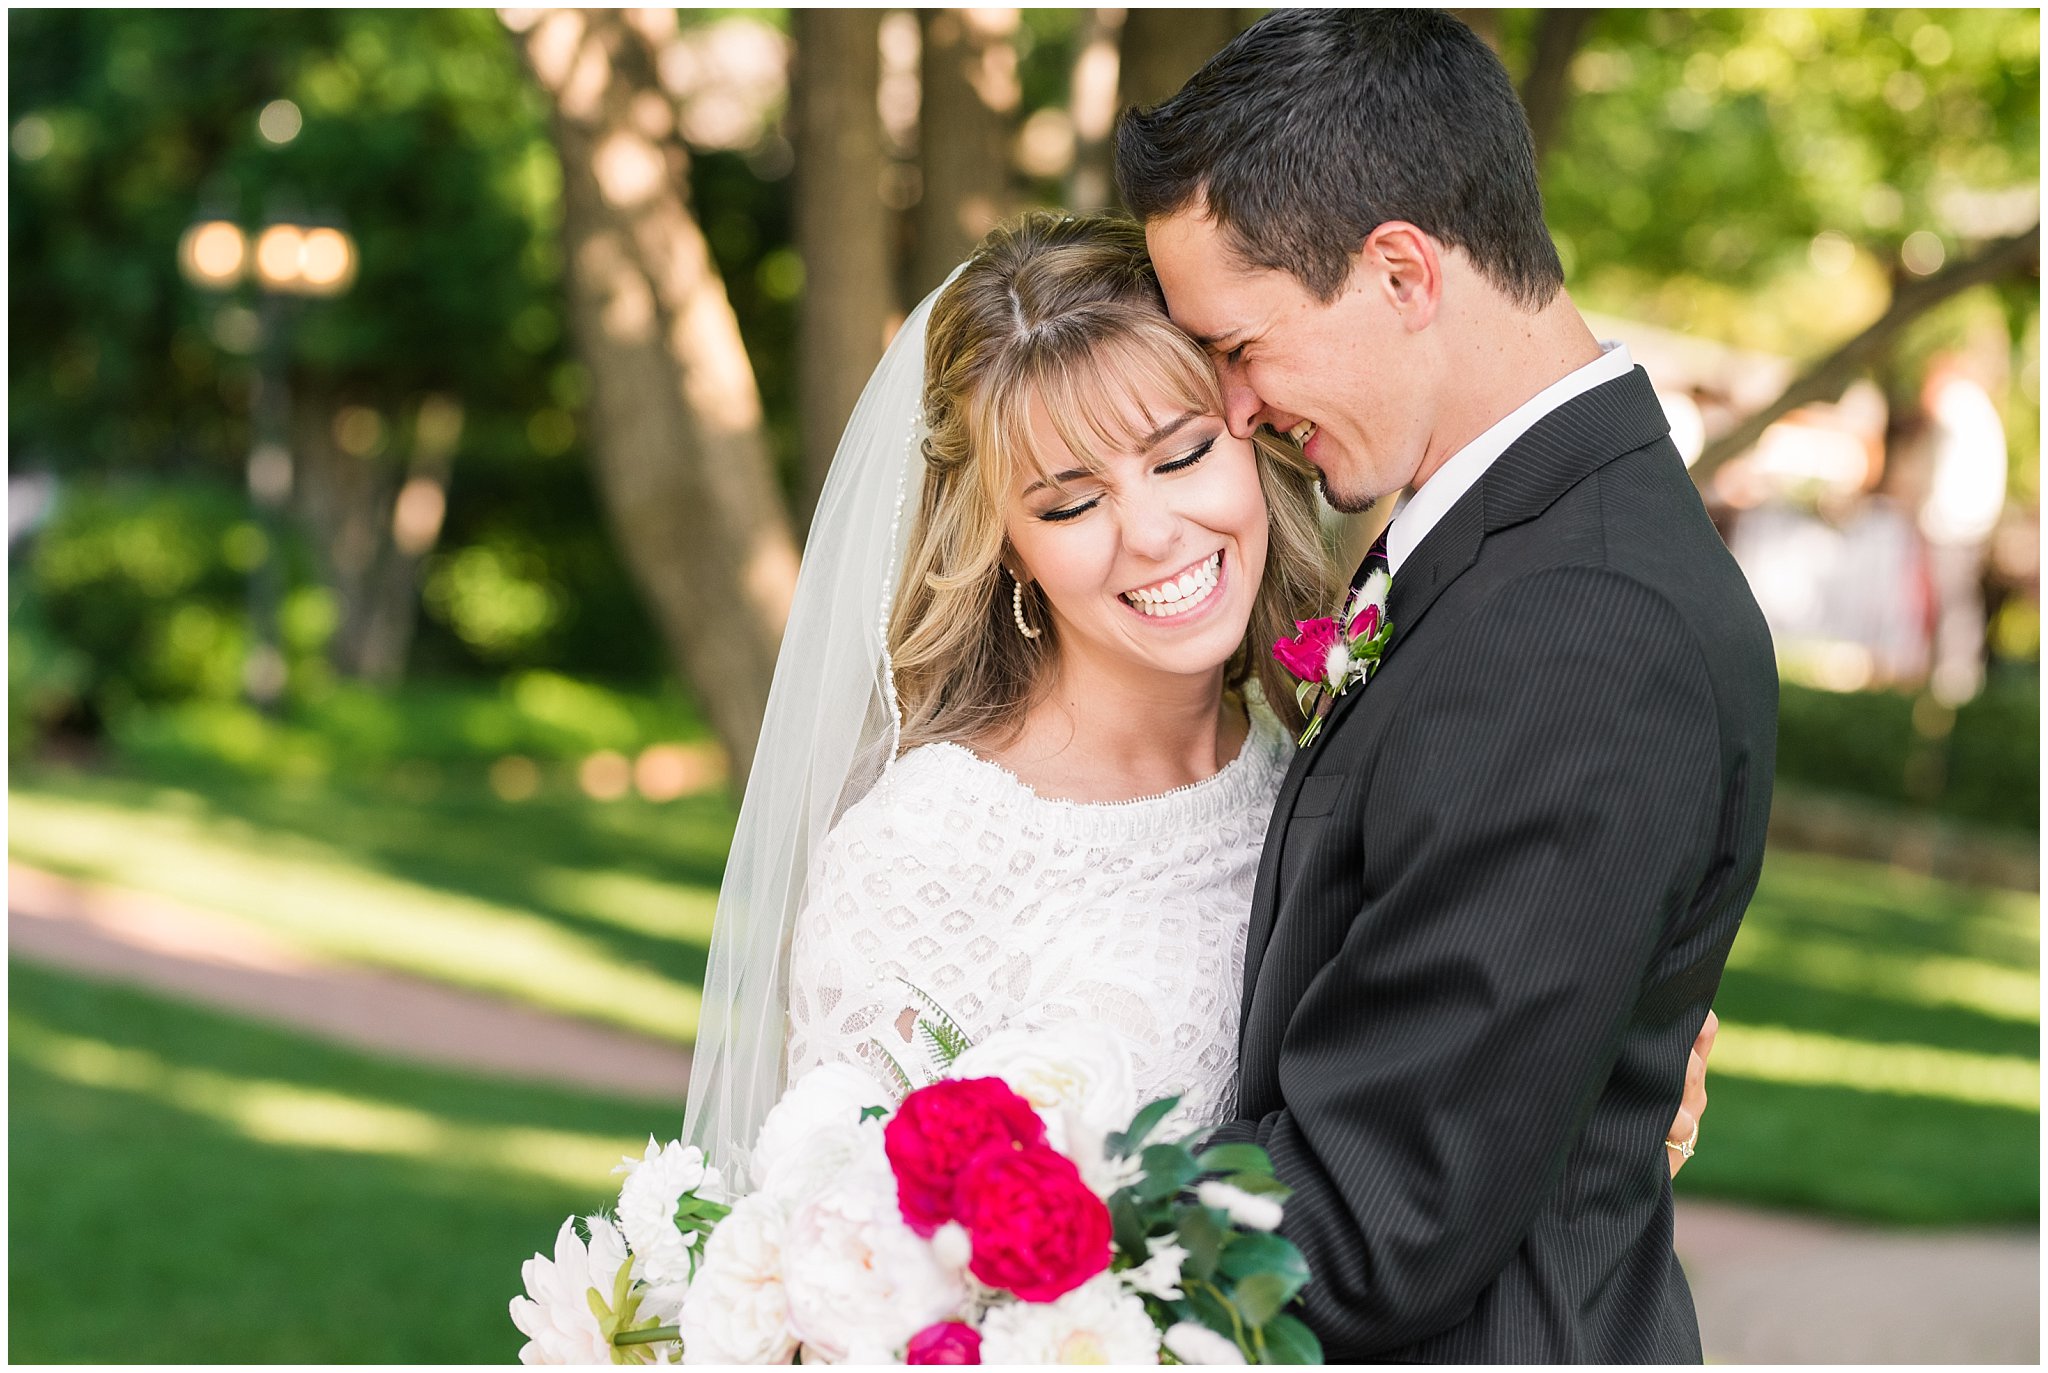 Bride and groom portraits candid moments laughing | white and deep pink florals with black suit and lace dress | Wadley Farms Summer Wedding | Jessie and Dallin Photography